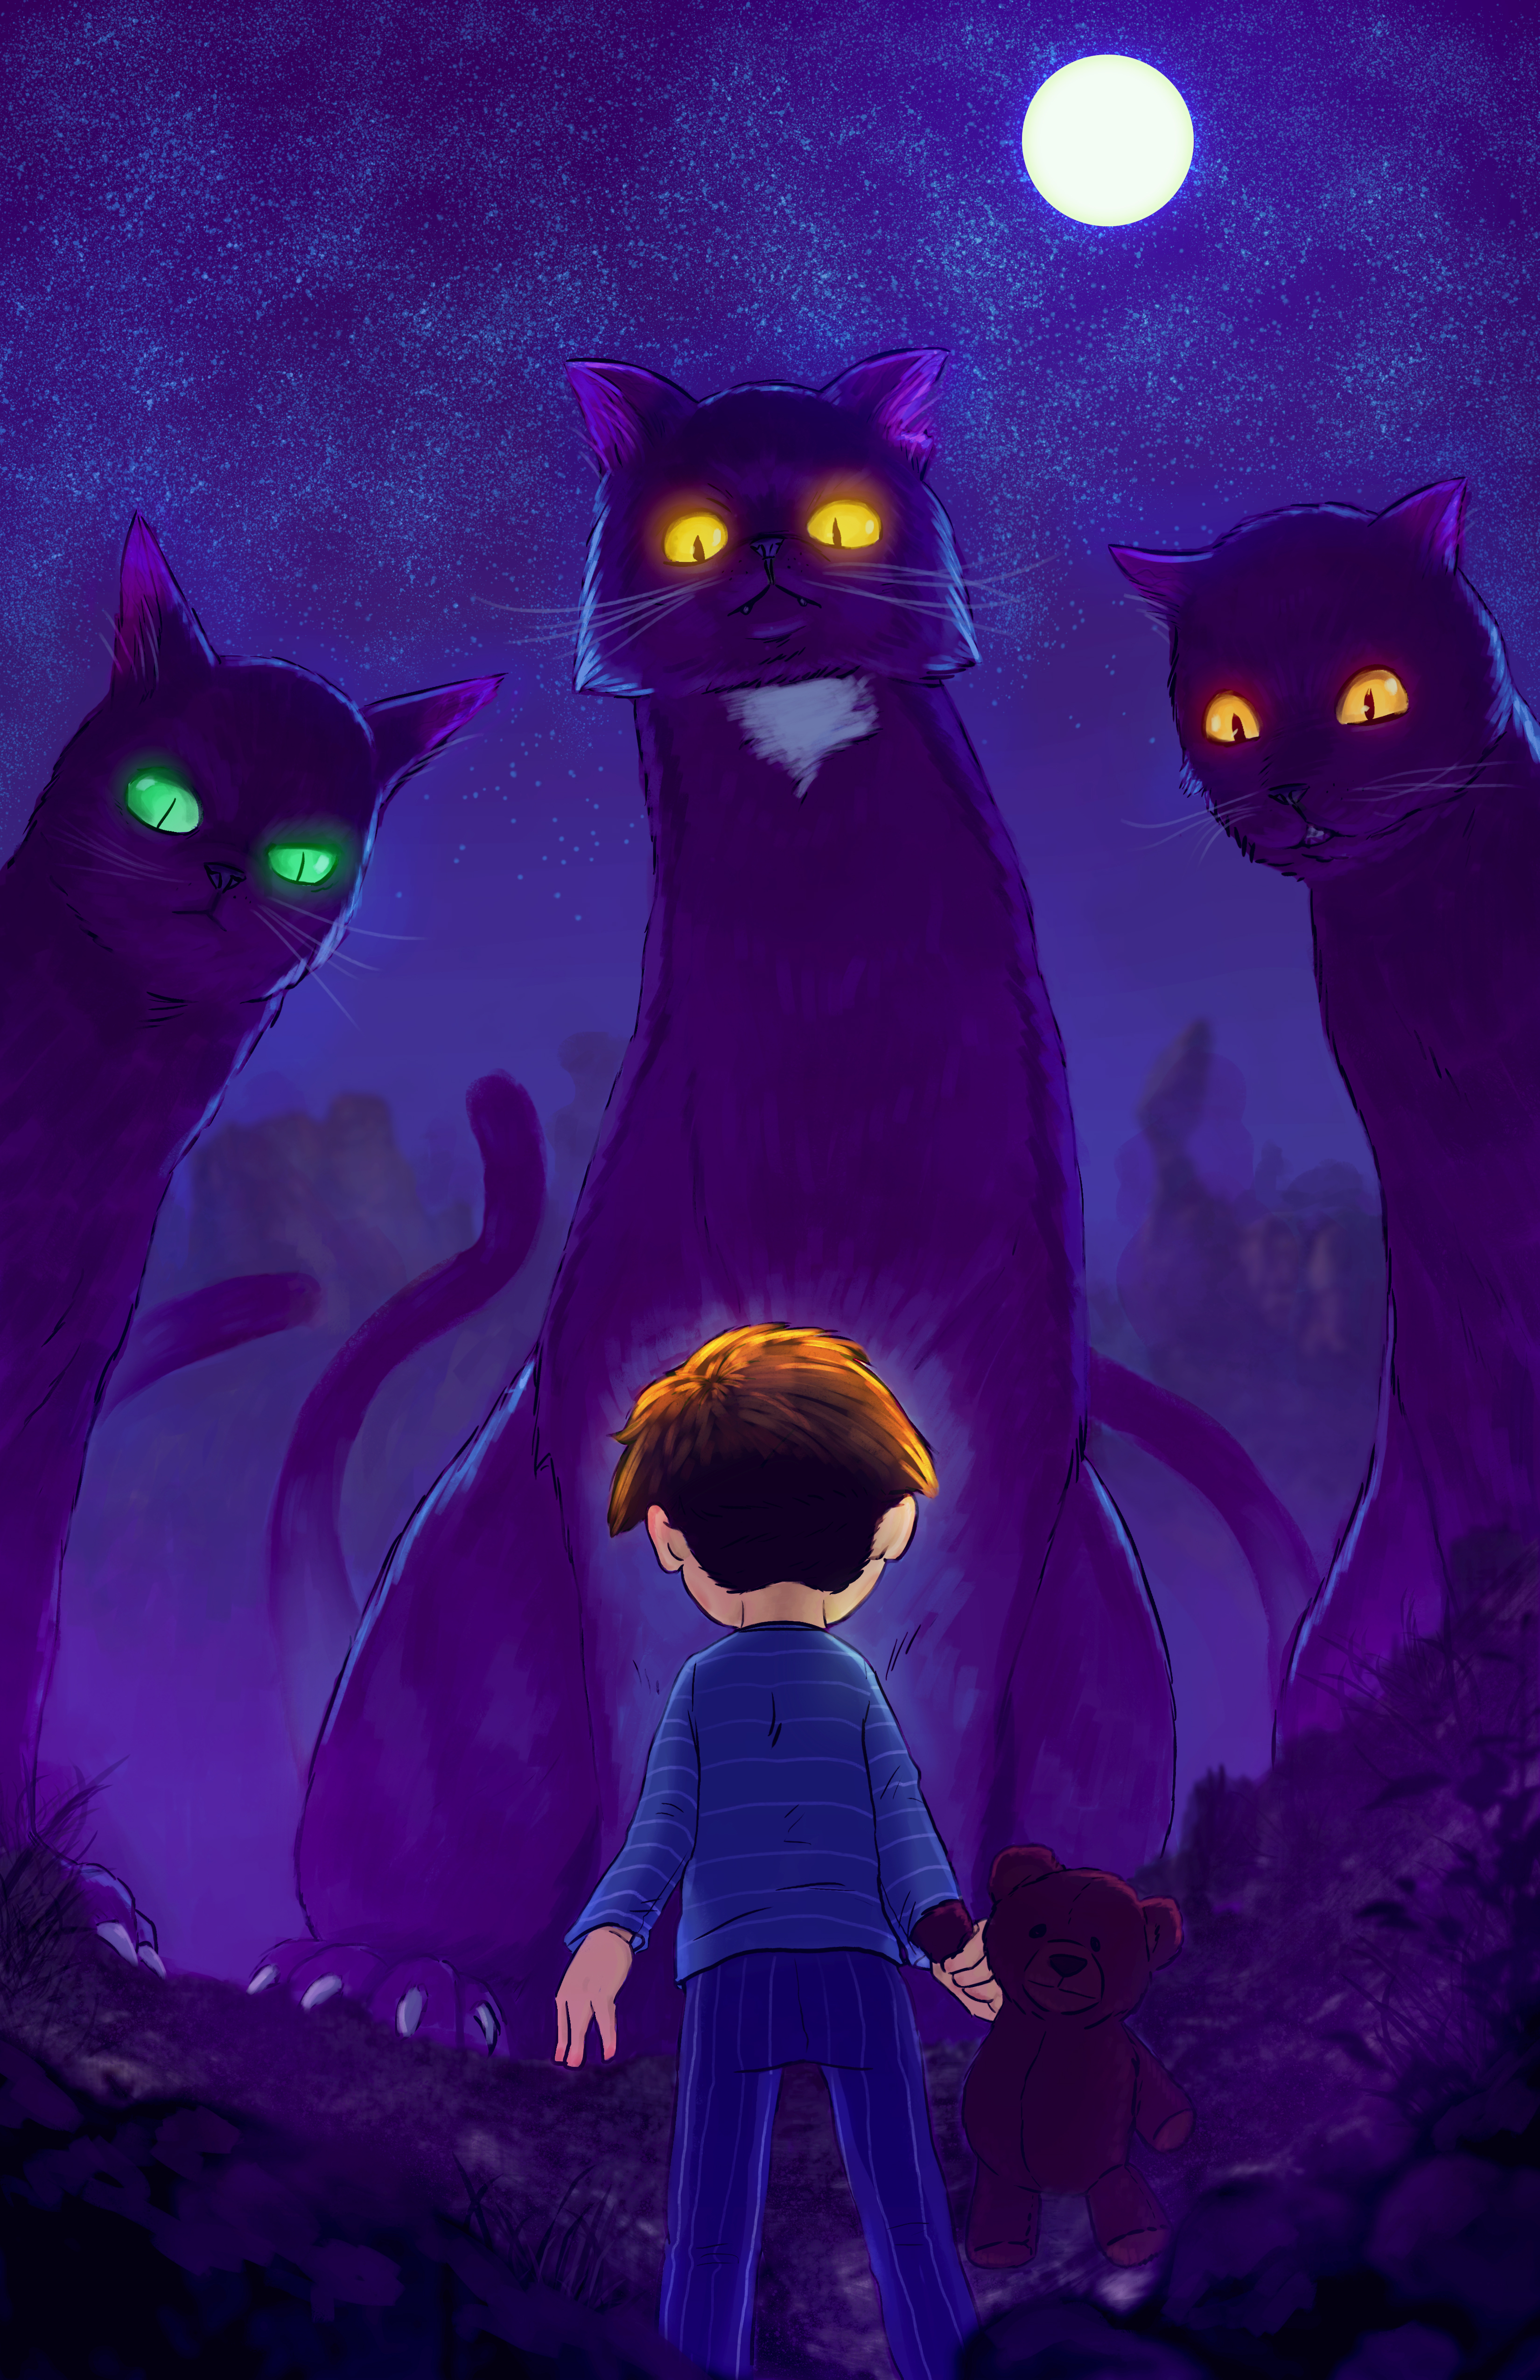 Three cartoon black cat Nightmares tower over a child with their teddy bear